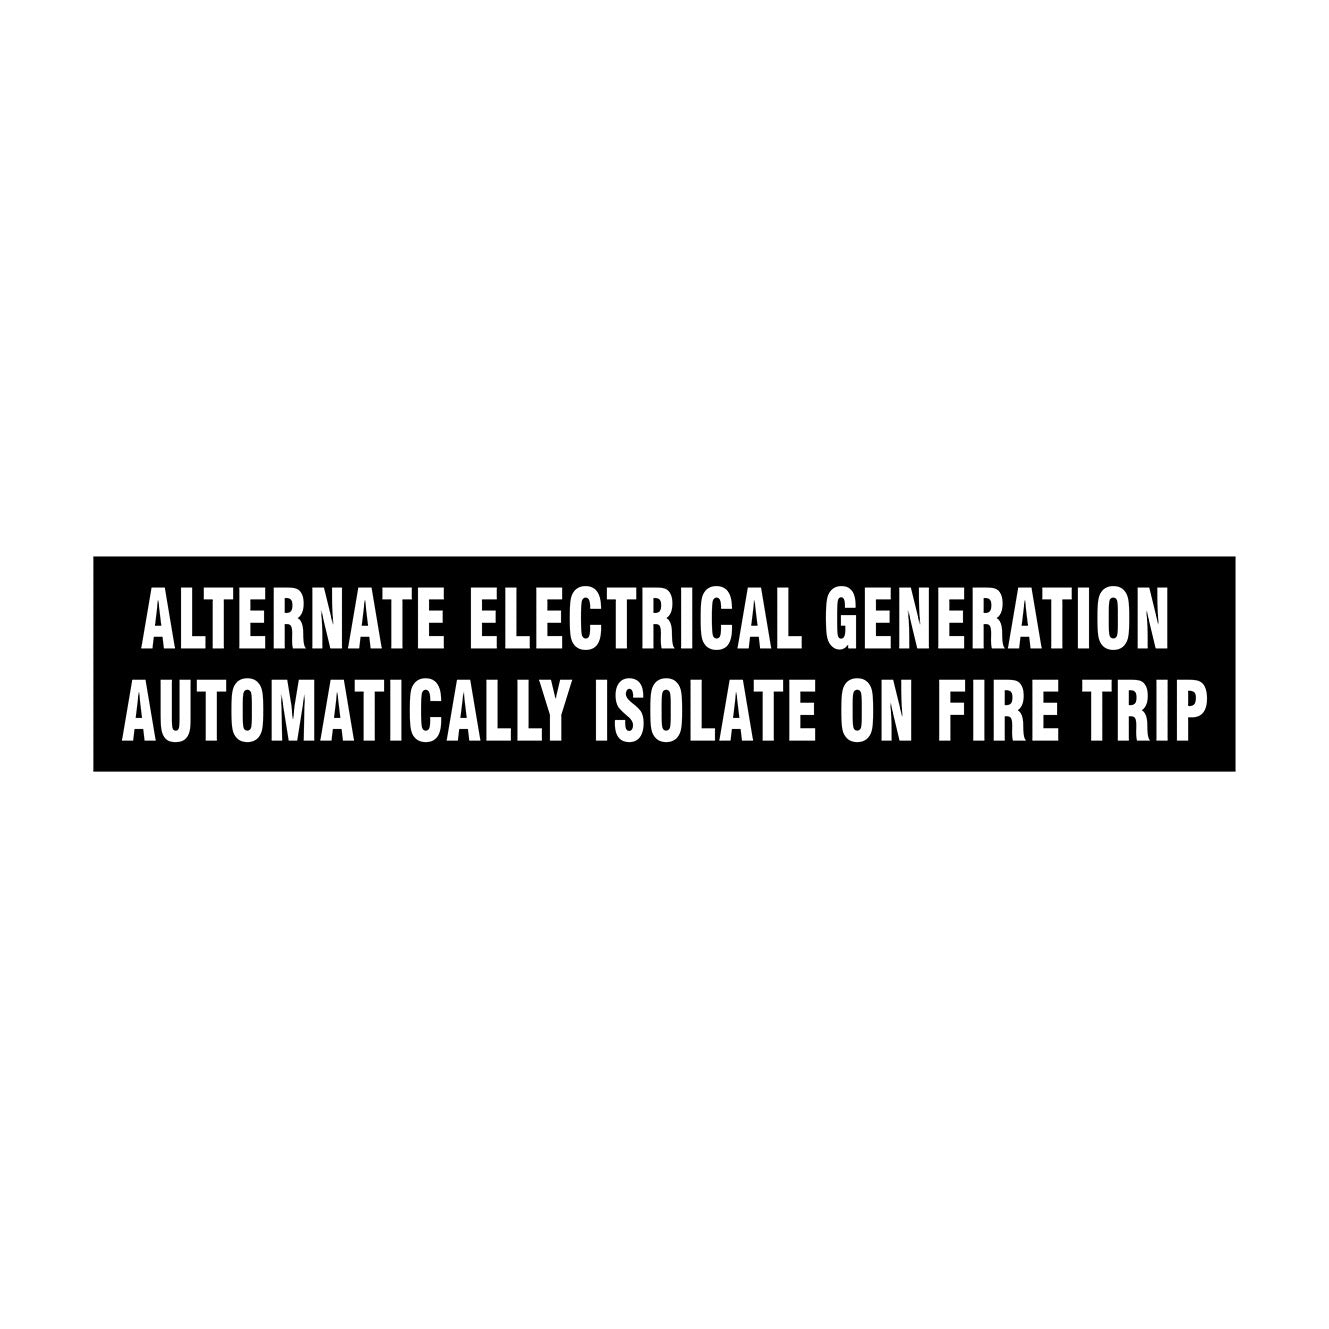 ALTERNATE ELECTRICAL GENERATION AUTOMATICALLY ISOLATE ON FIRE TRIP SIGN